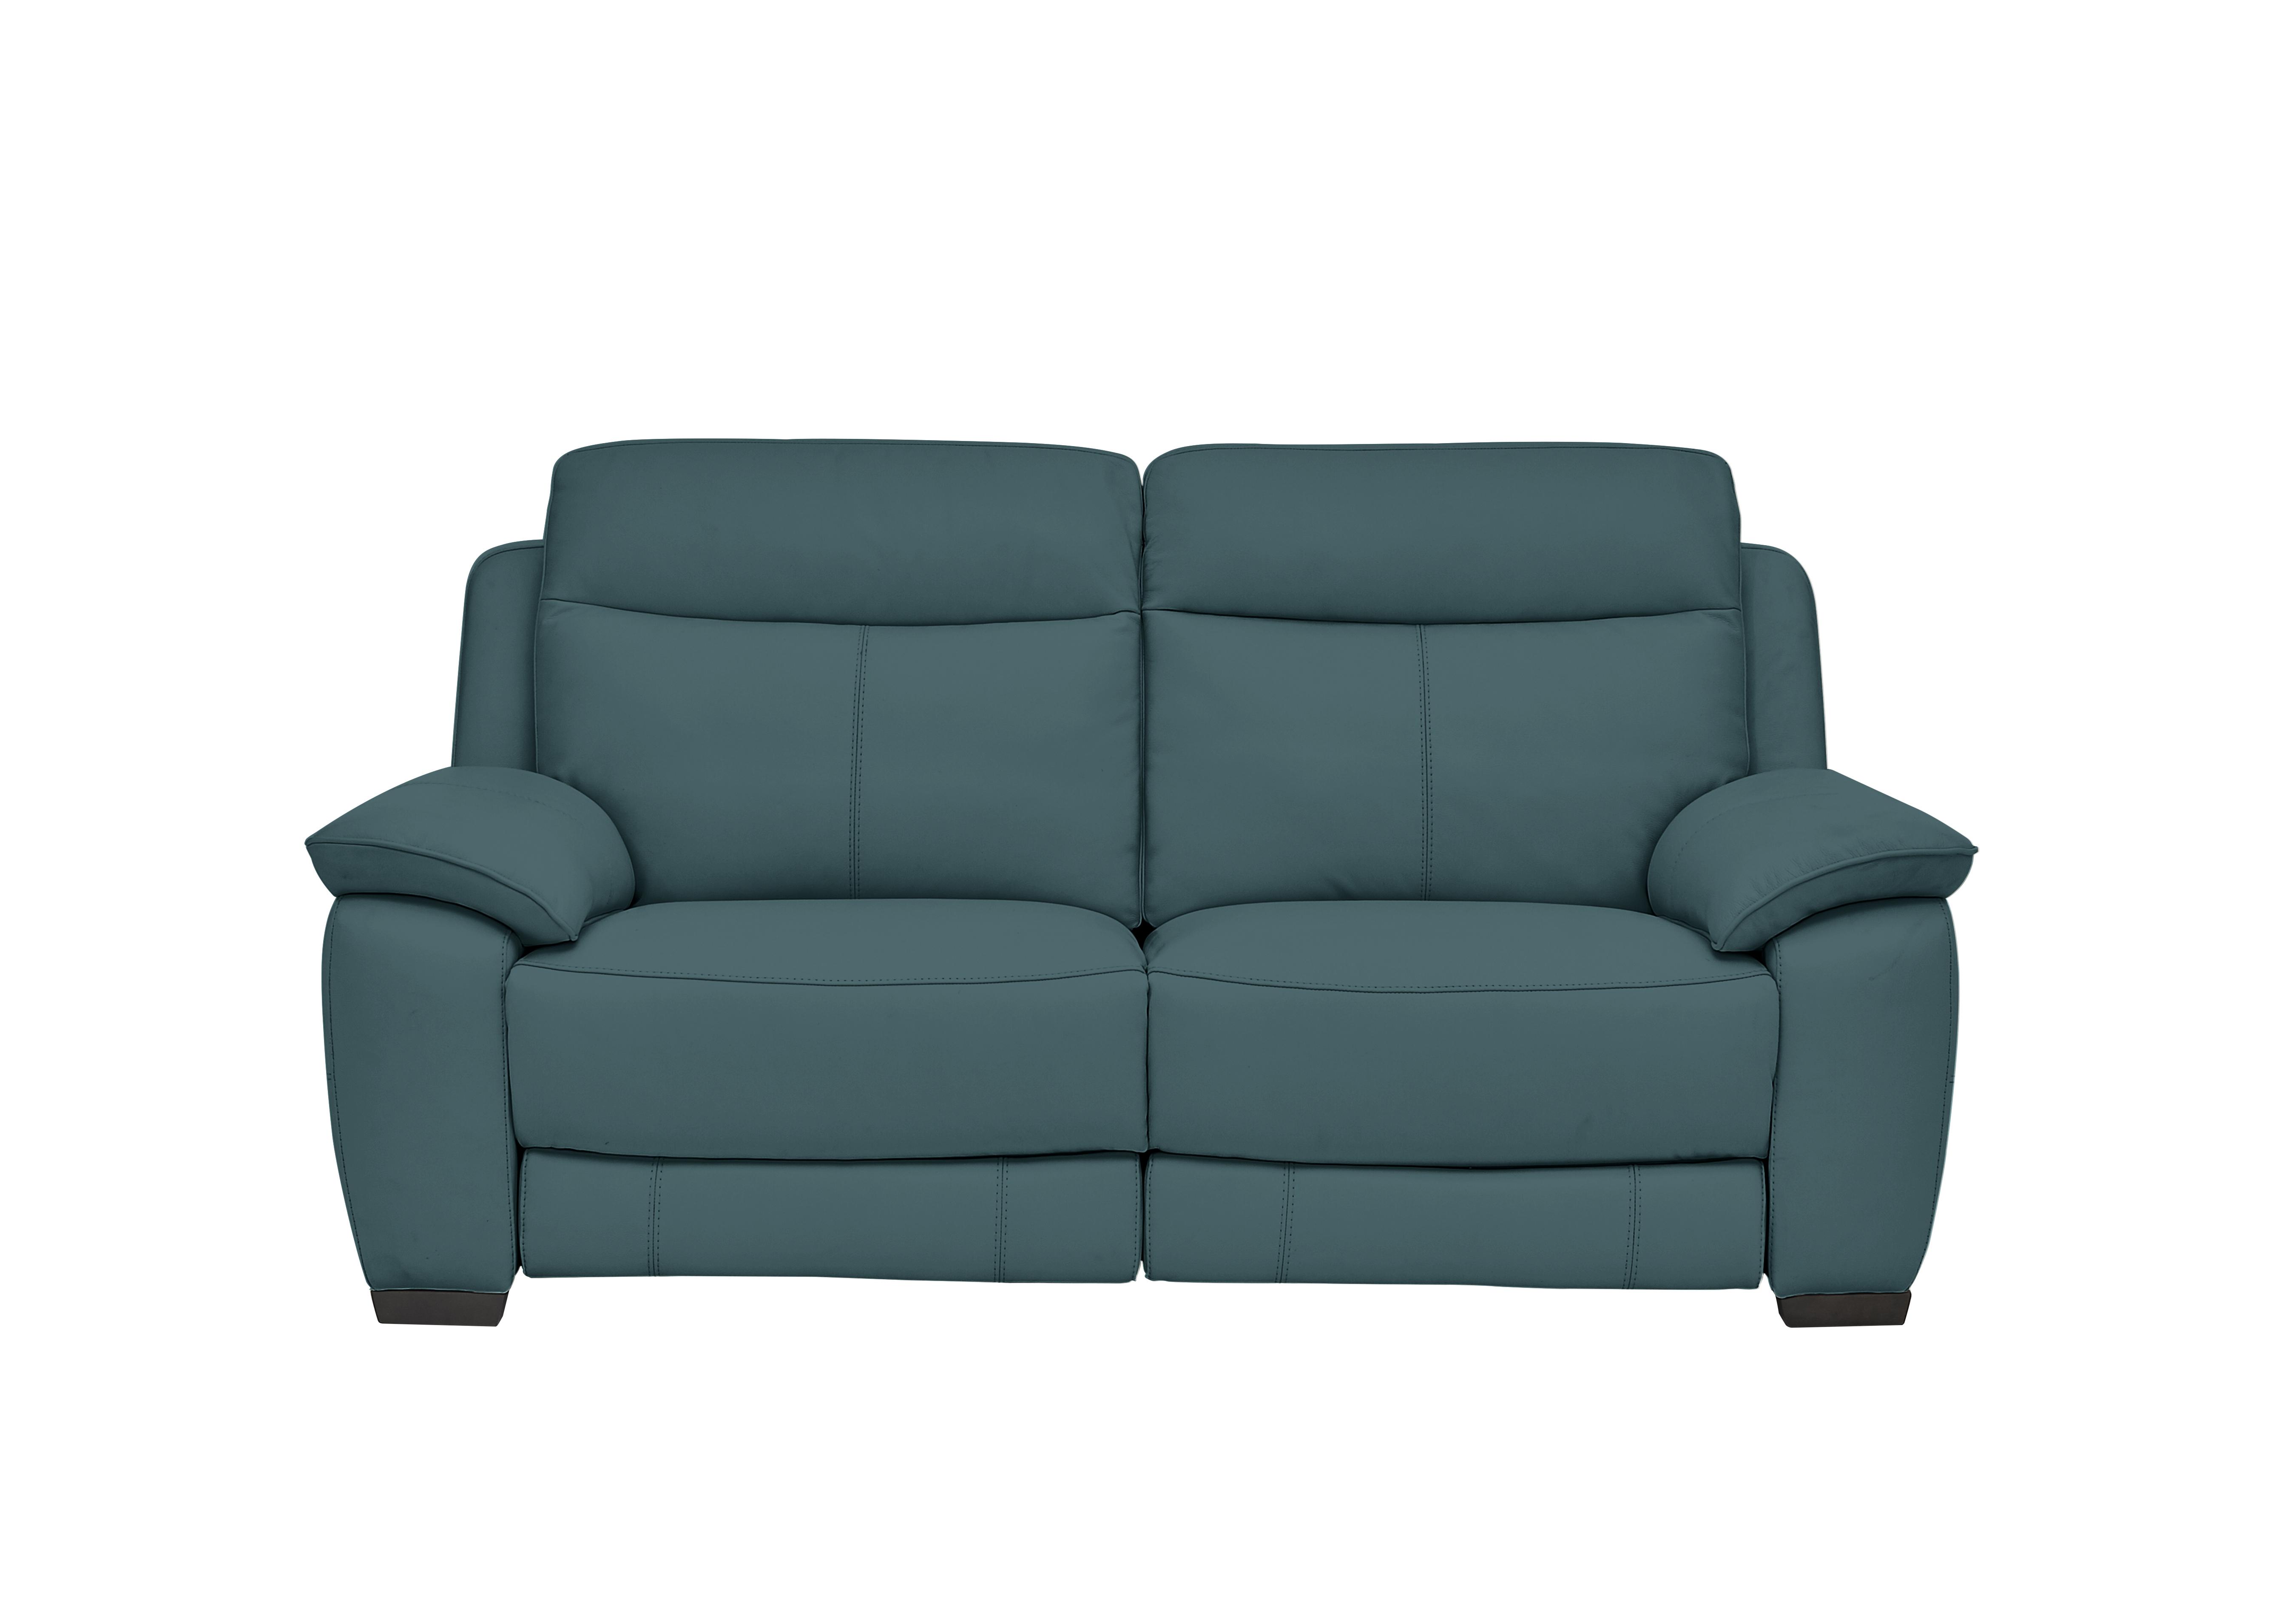 Starlight Express 2 Seater Leather Sofa in Bv-301e Lake Green on Furniture Village